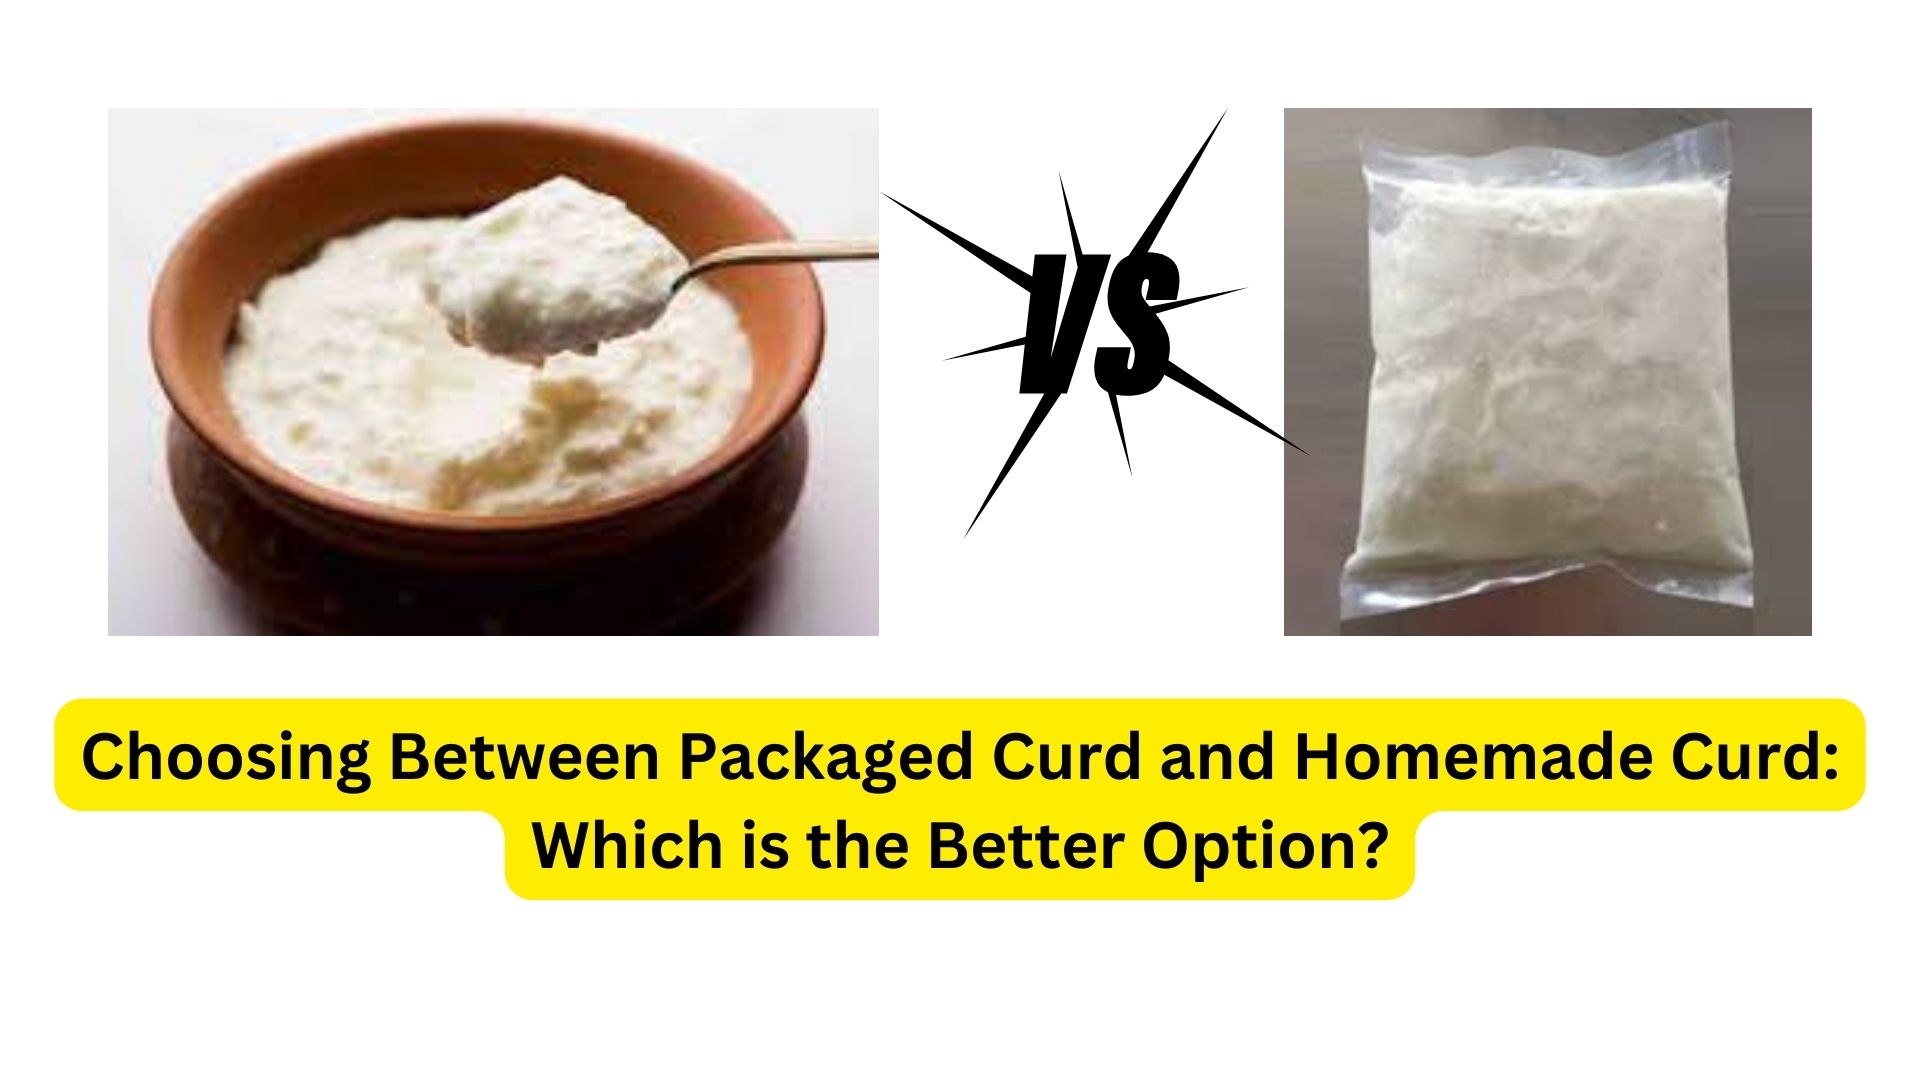 Choosing Between Packaged Curd and Homemade Curd: Which is the Better Option?